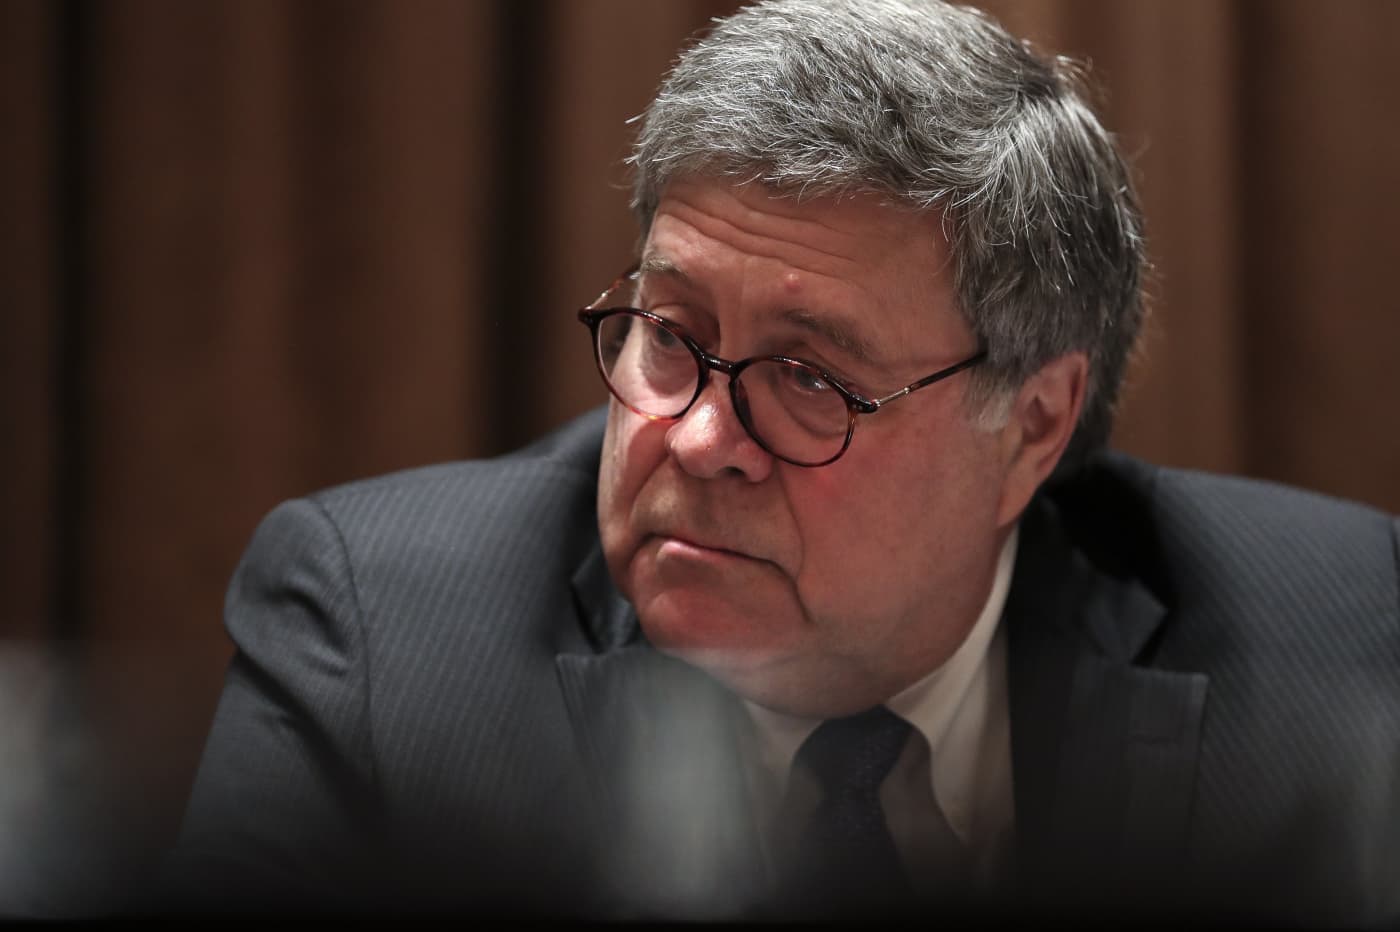 #‘Unmasking’ probe ordered by Barr finds no wrongdoing by Obama officials: report